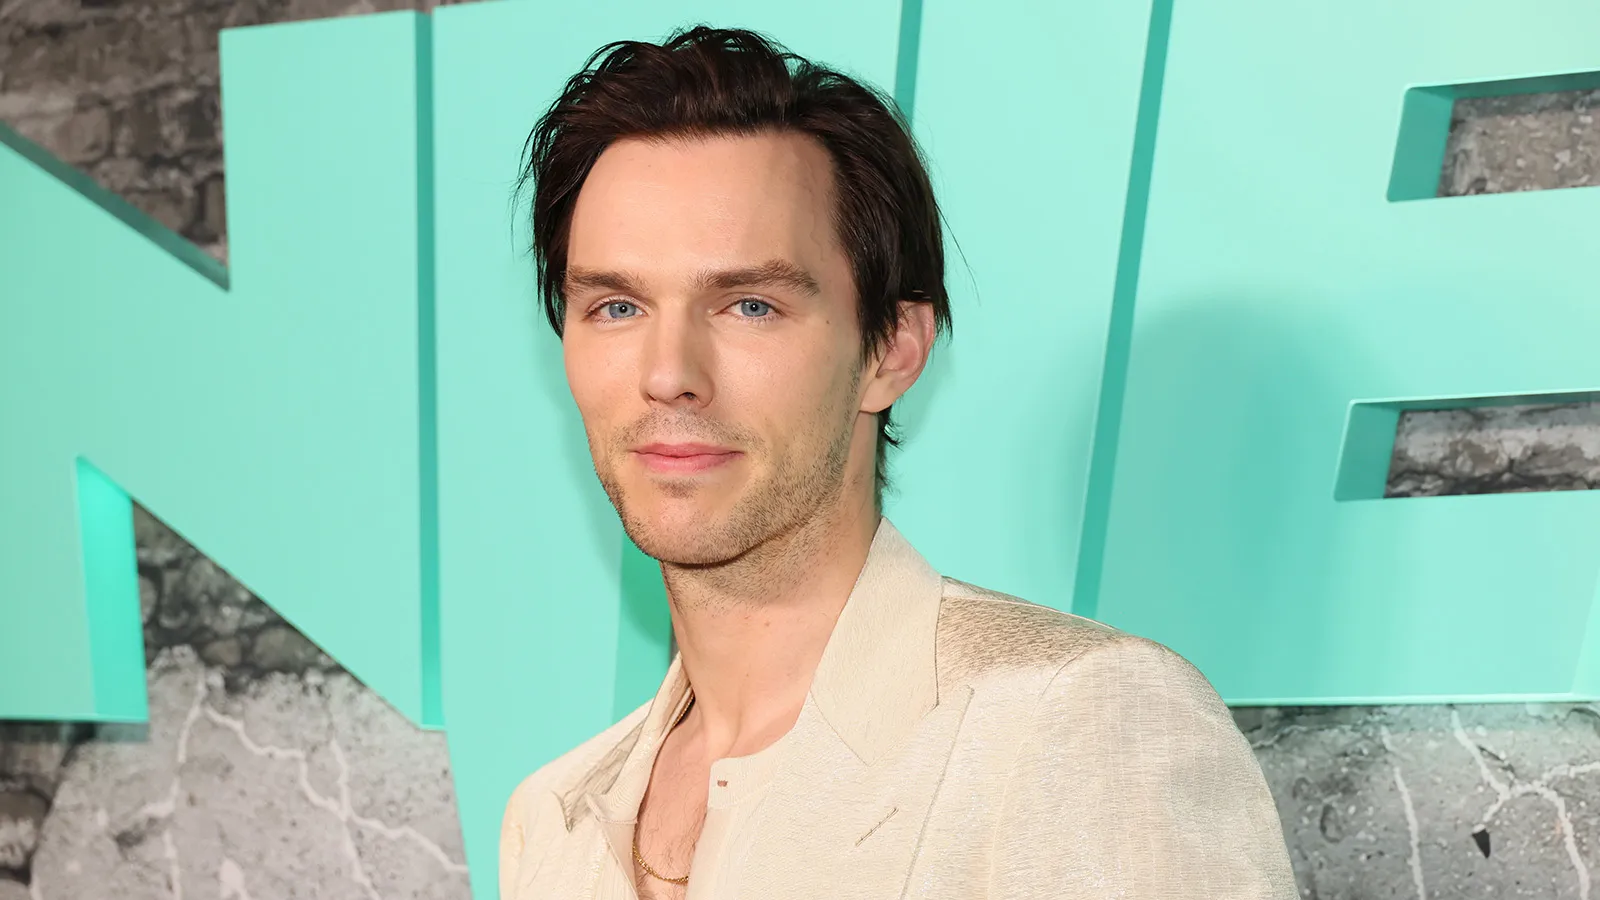 Prayers for Nicholas Hoult roll in following Superman casting but are they warranted?